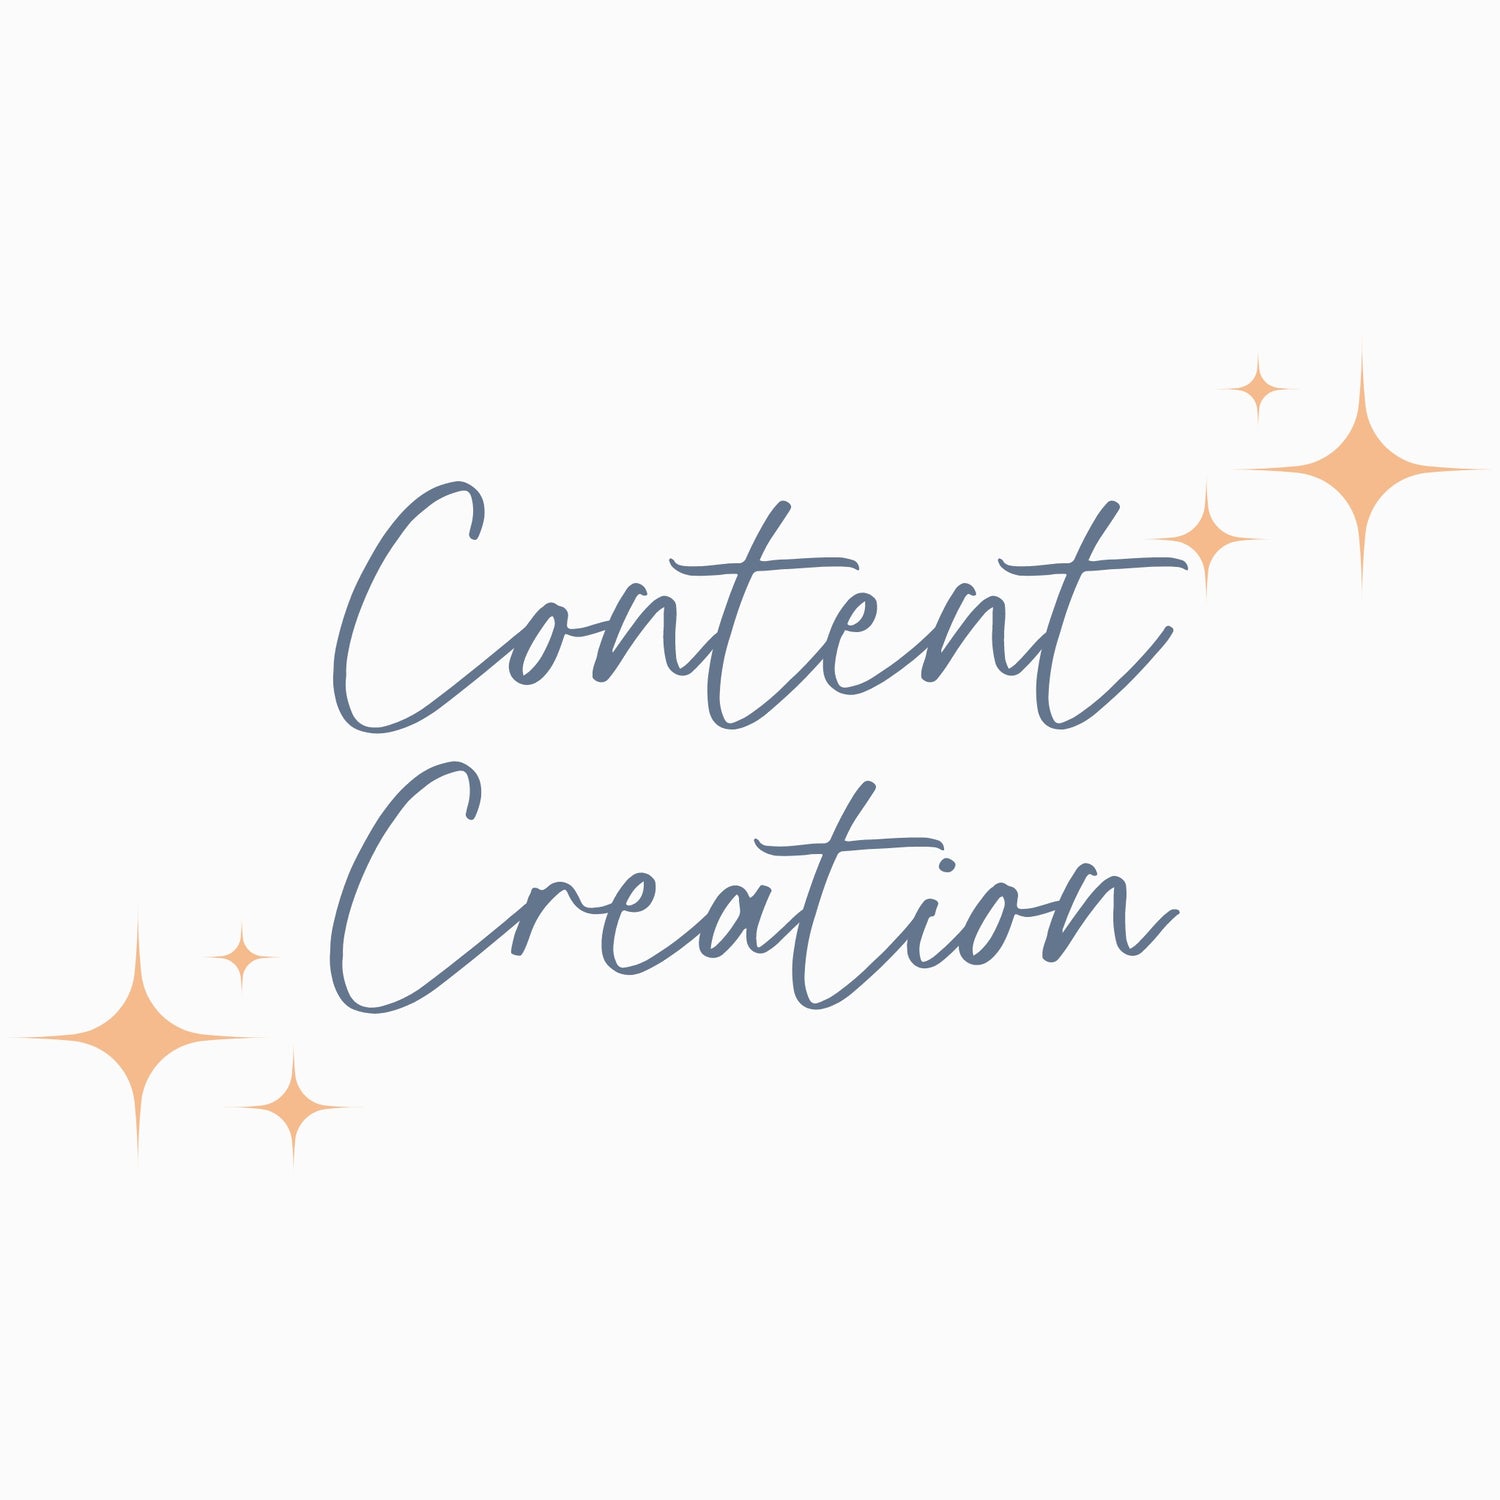 Content Creation for Facebook pages, groups, or Instagram